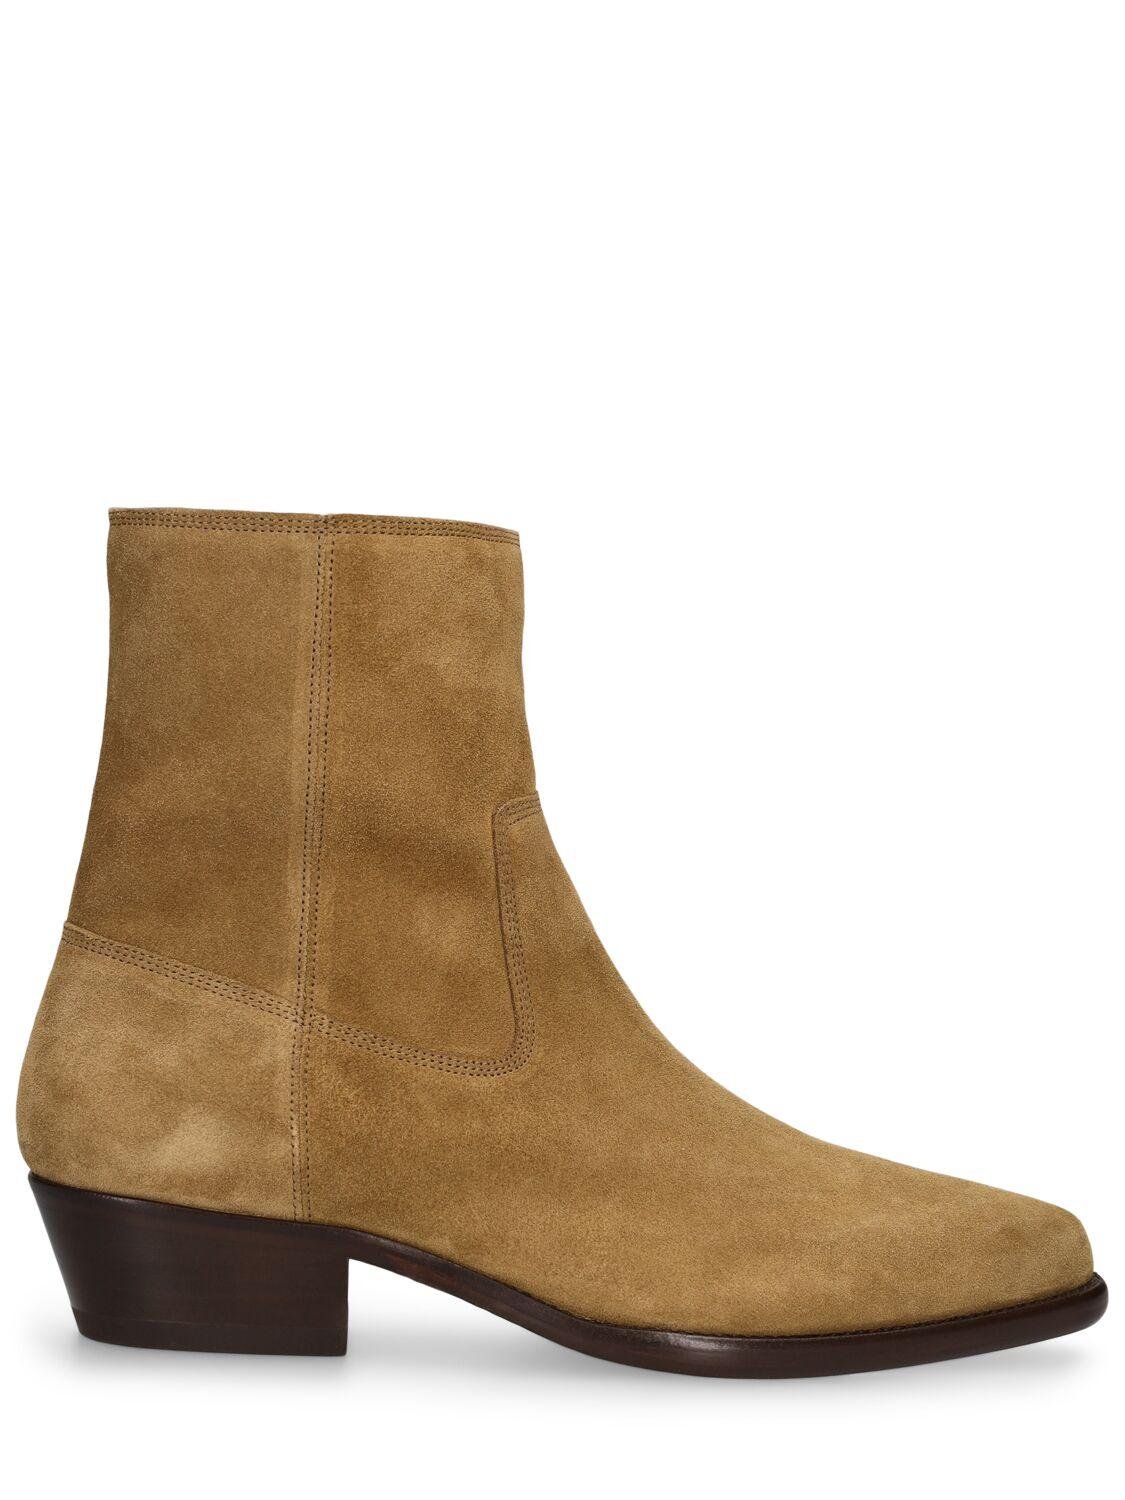 45mm Delix Suede Chelsea Boots by MARANT